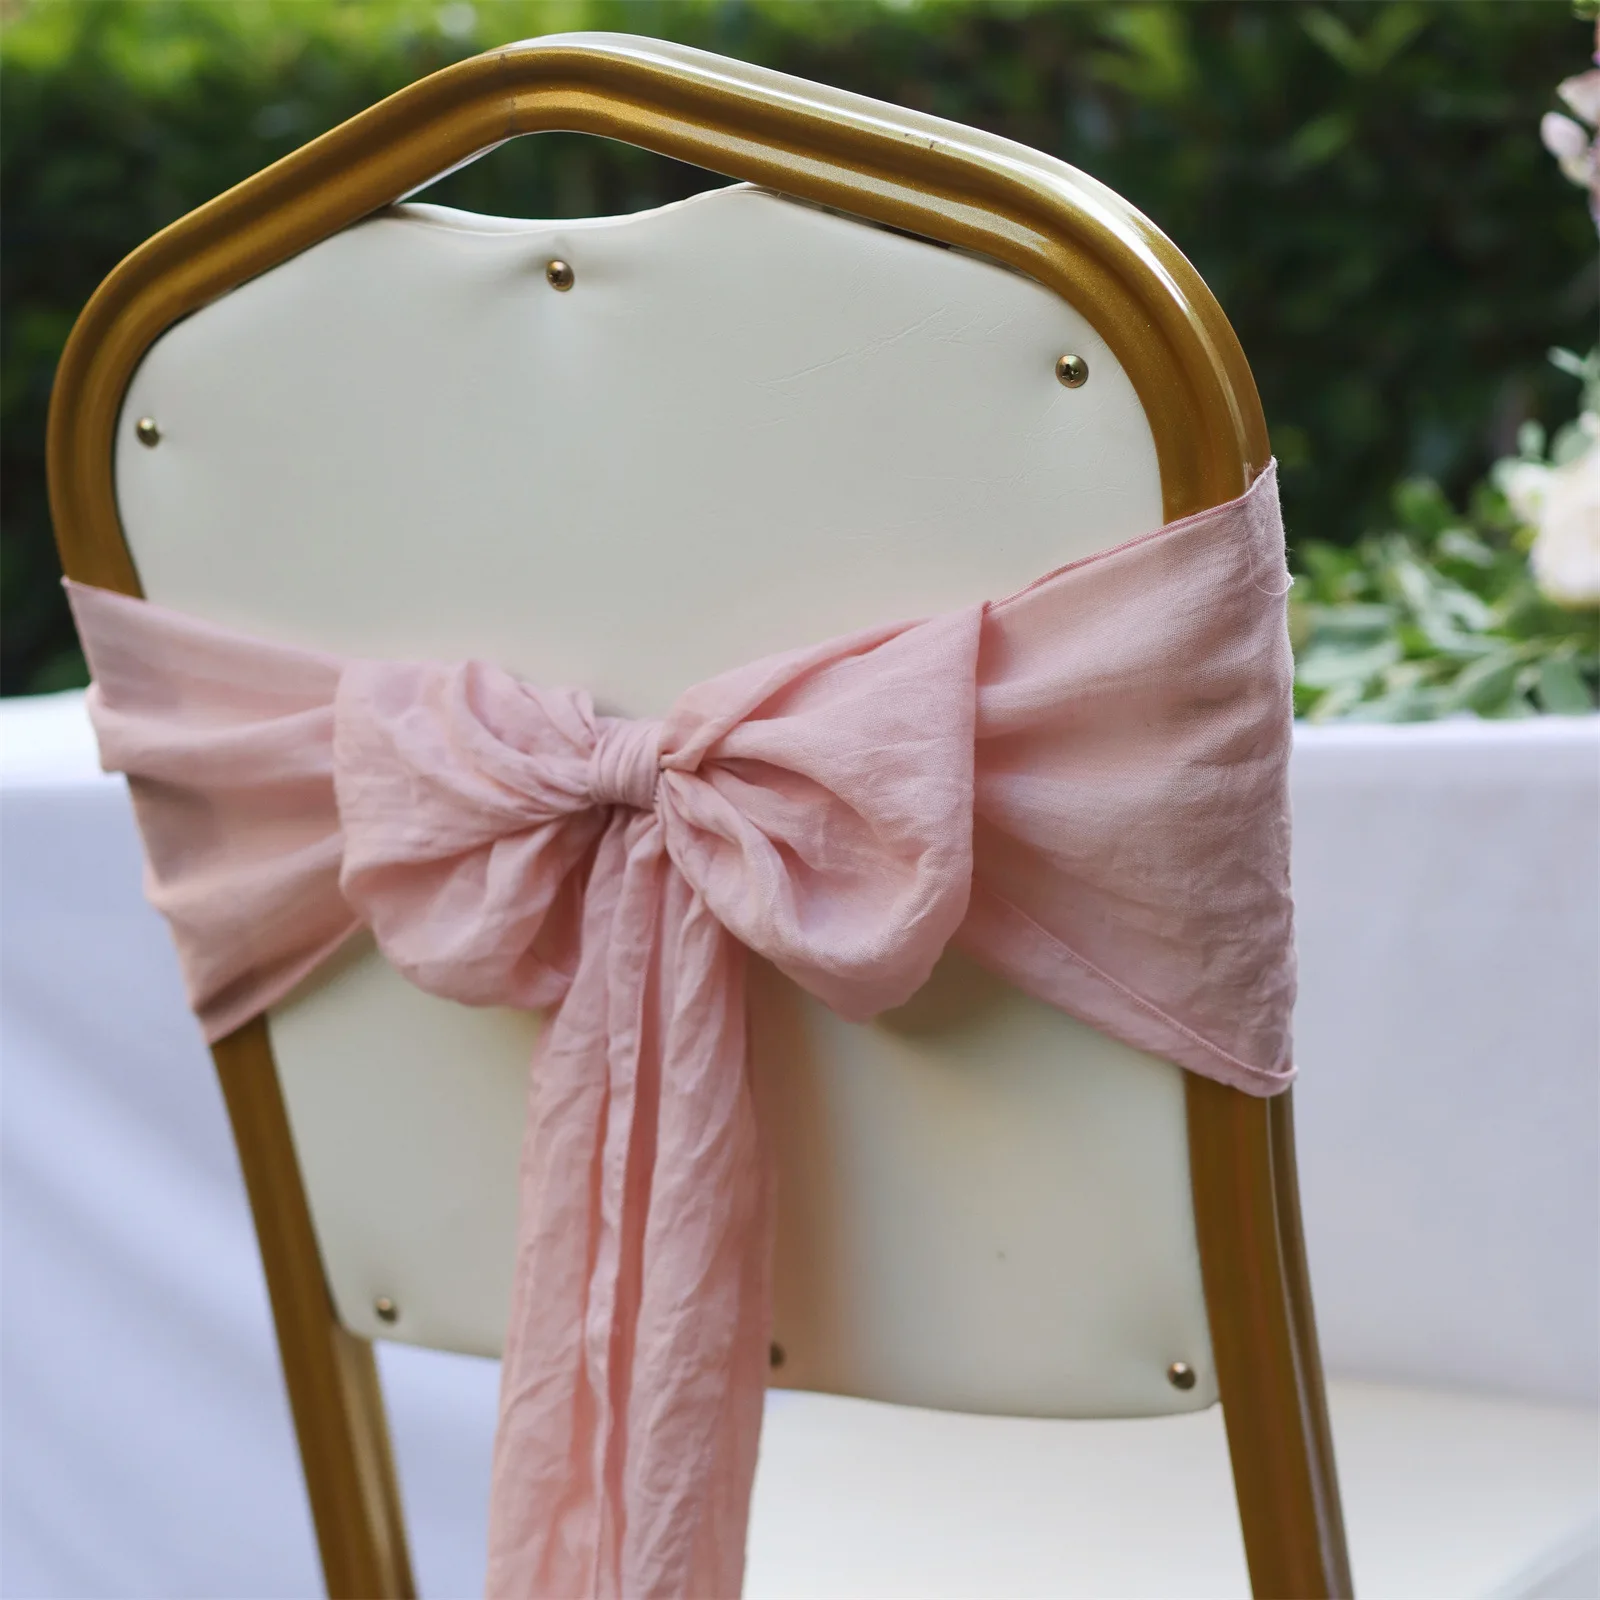 

Wholesale 24pcs Chair Bows Sashes Tie Back Decorative Item Cover Ups for Wedding Reception Events Banquets Chairs Decoration